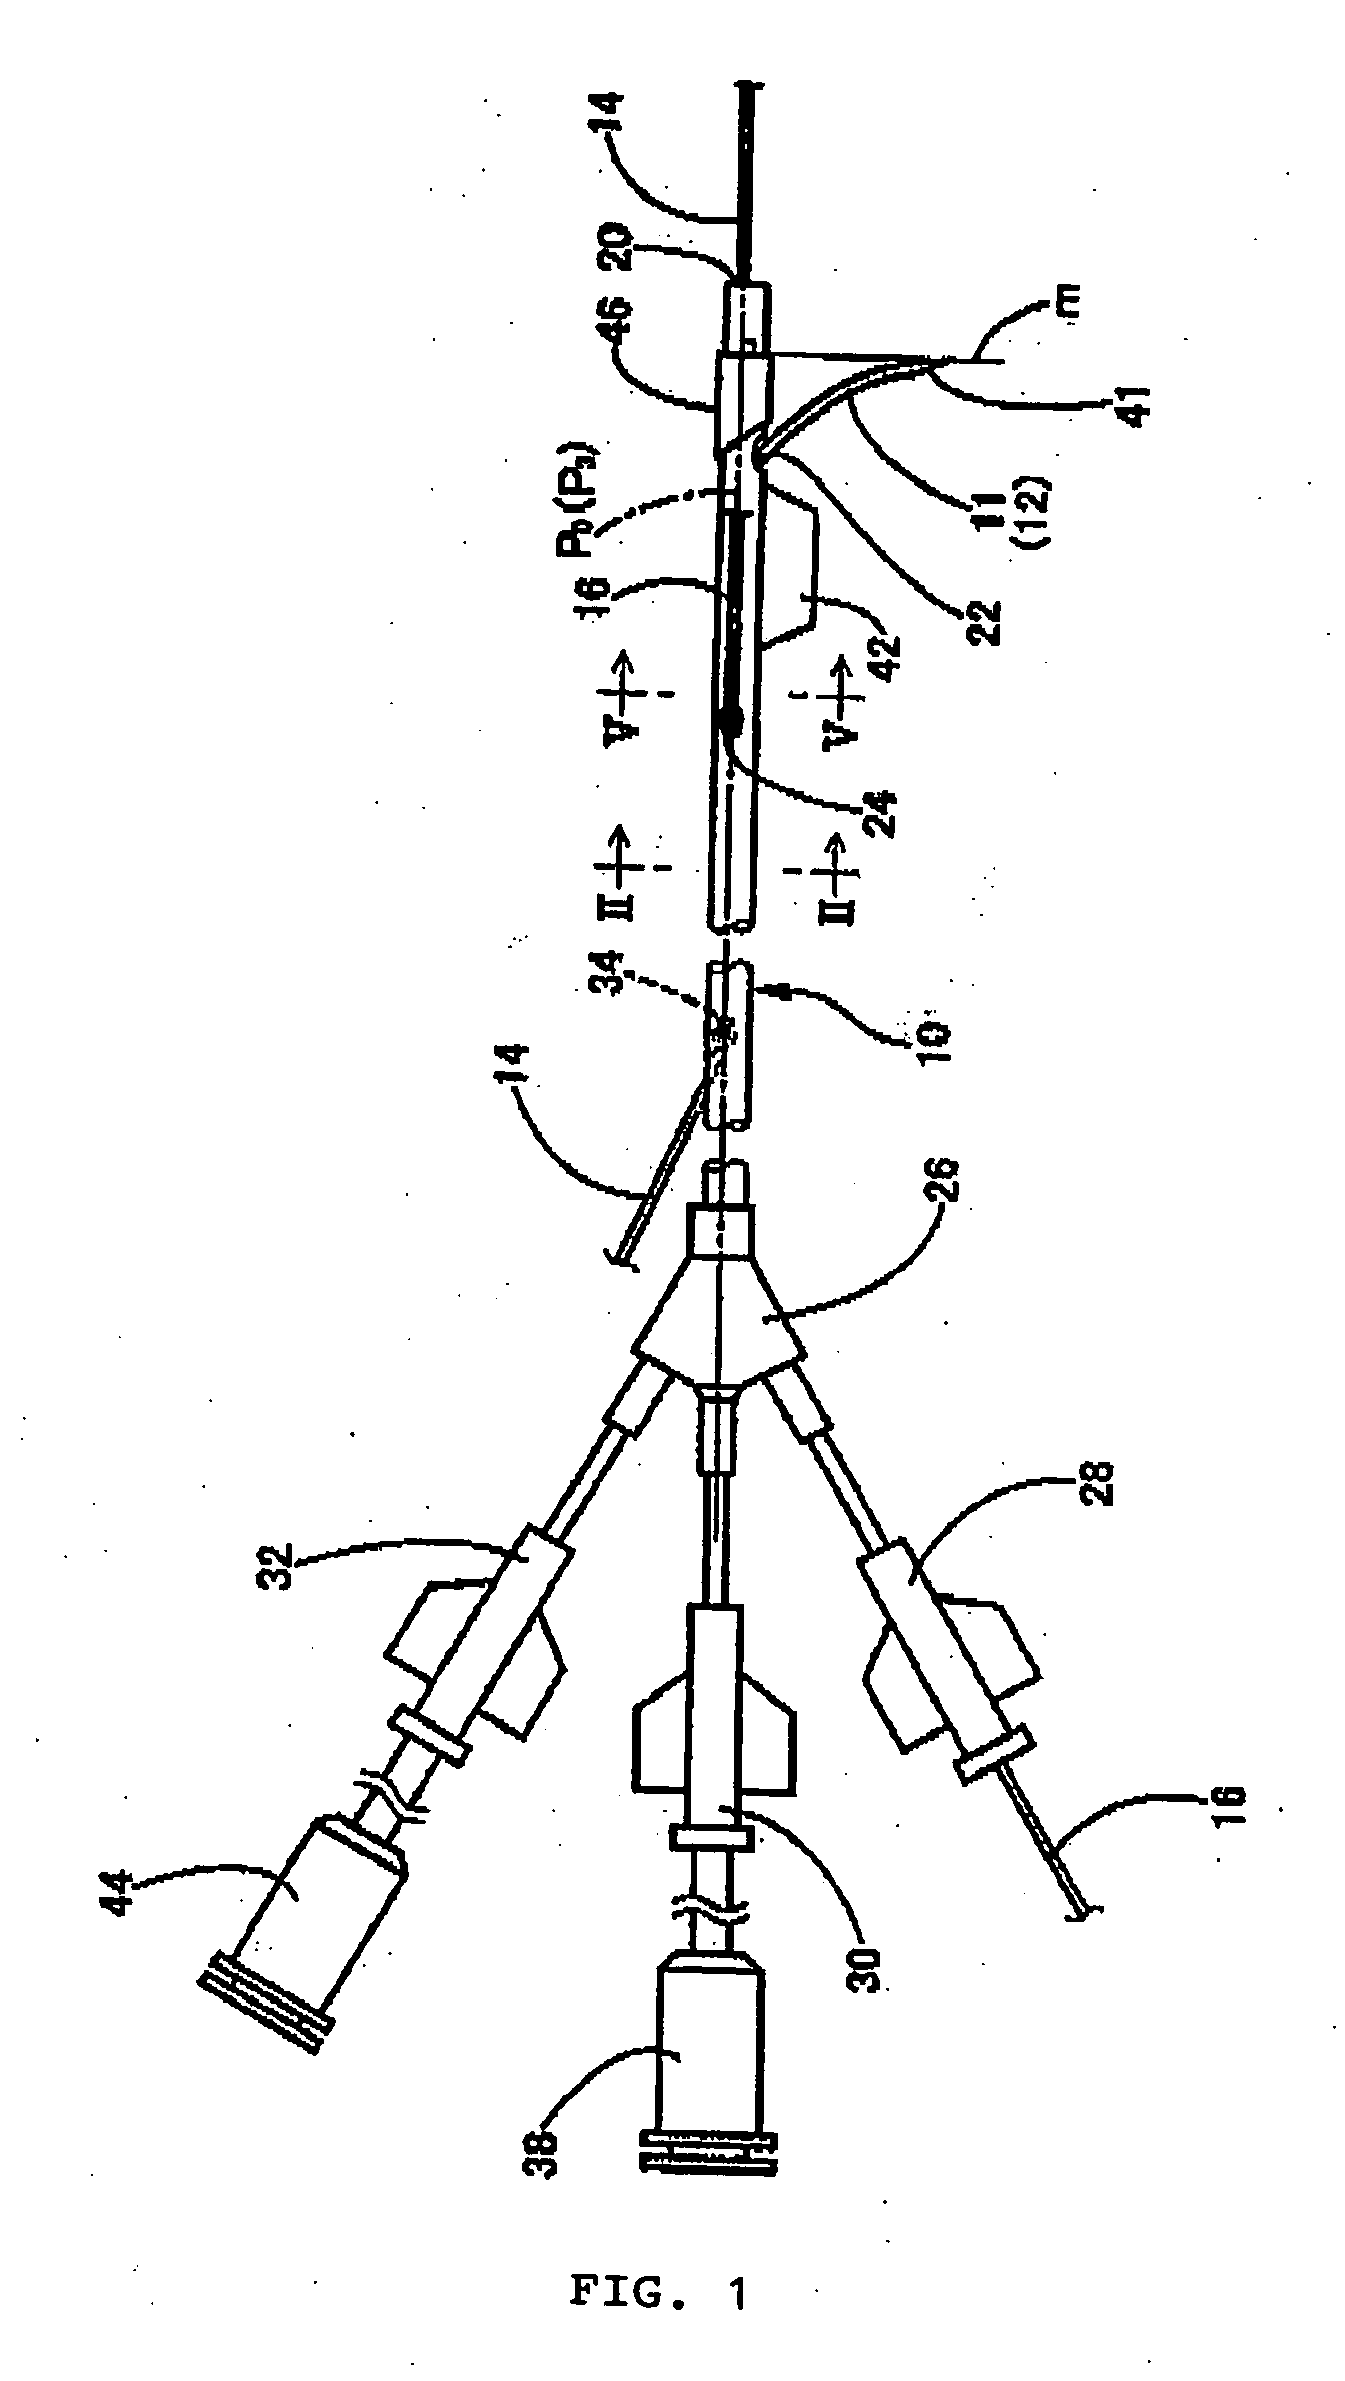 Infusion device